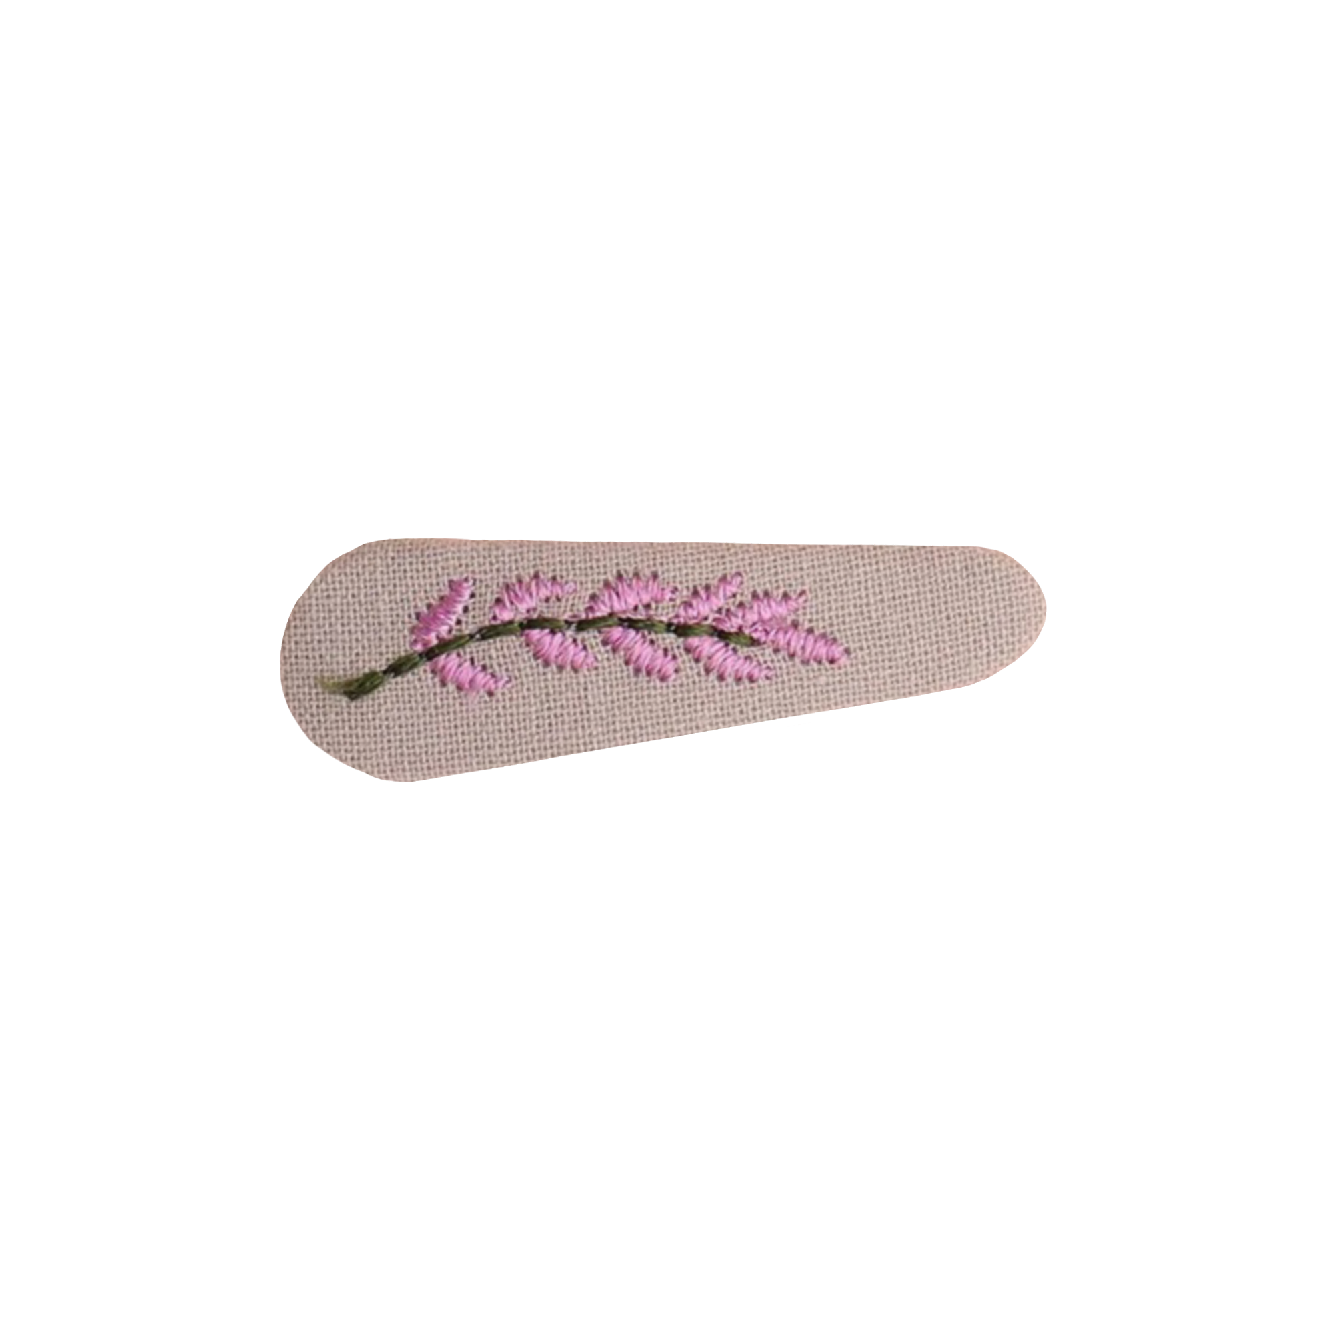 'Embroidered Flower' Hair Clip in Mauve and Lilac